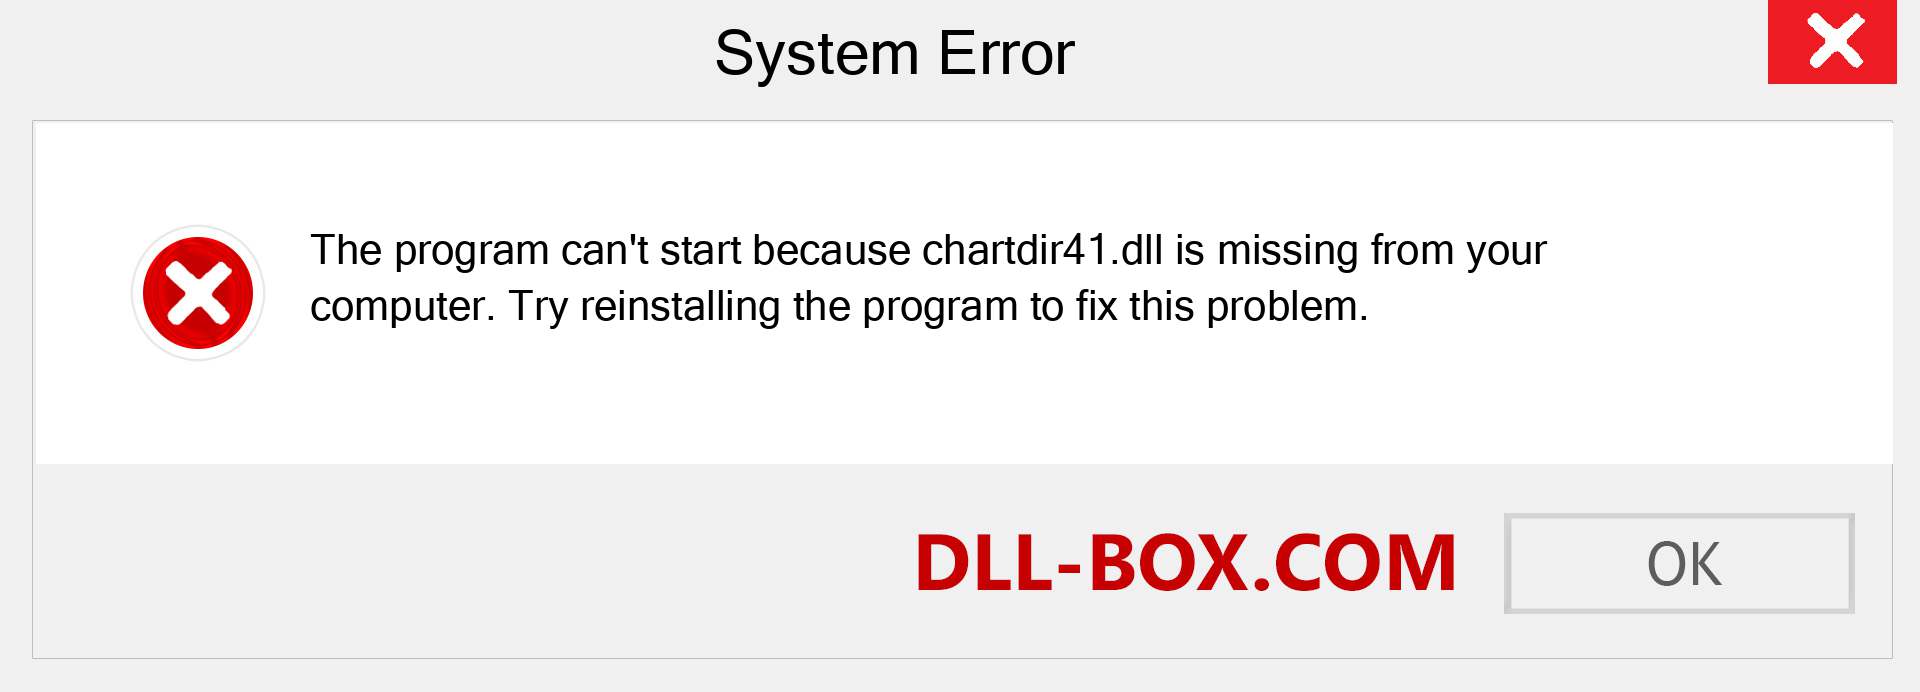  chartdir41.dll file is missing?. Download for Windows 7, 8, 10 - Fix  chartdir41 dll Missing Error on Windows, photos, images